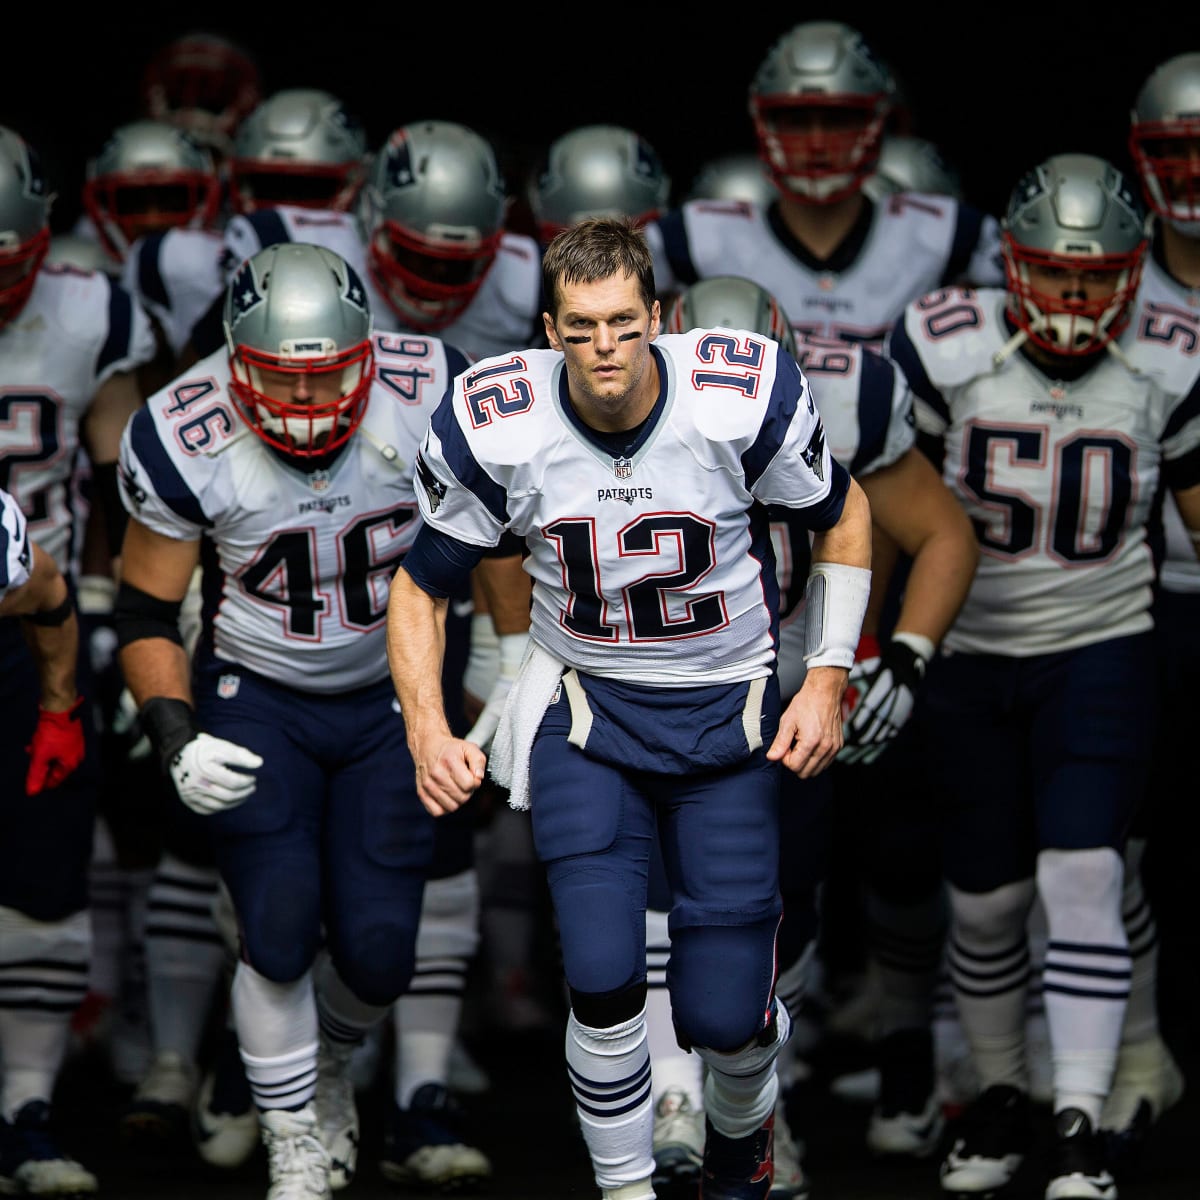 New rumor claims Tom Brady could return to Patriots